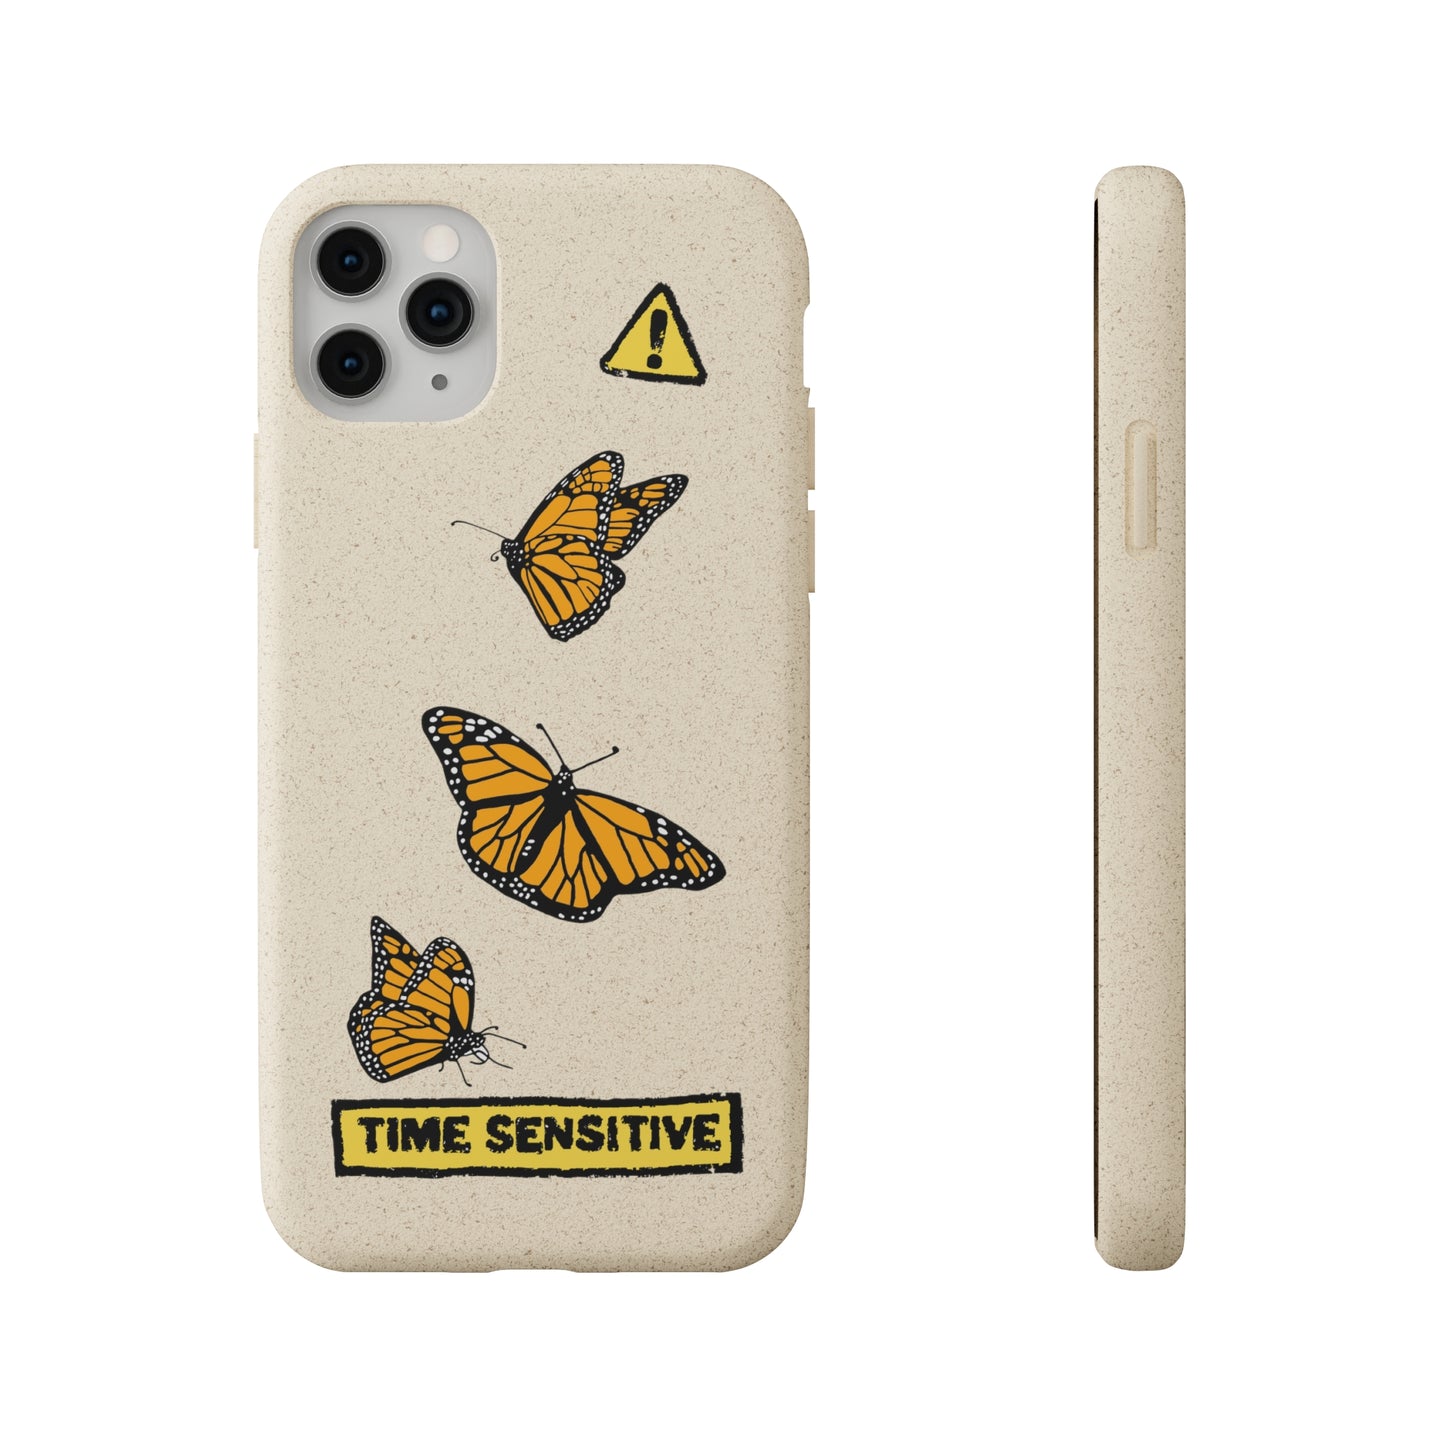 The back and side of the Monarch Butterfly Phone Case, Tan, The artwork is of three Monarch Butterflies flying.